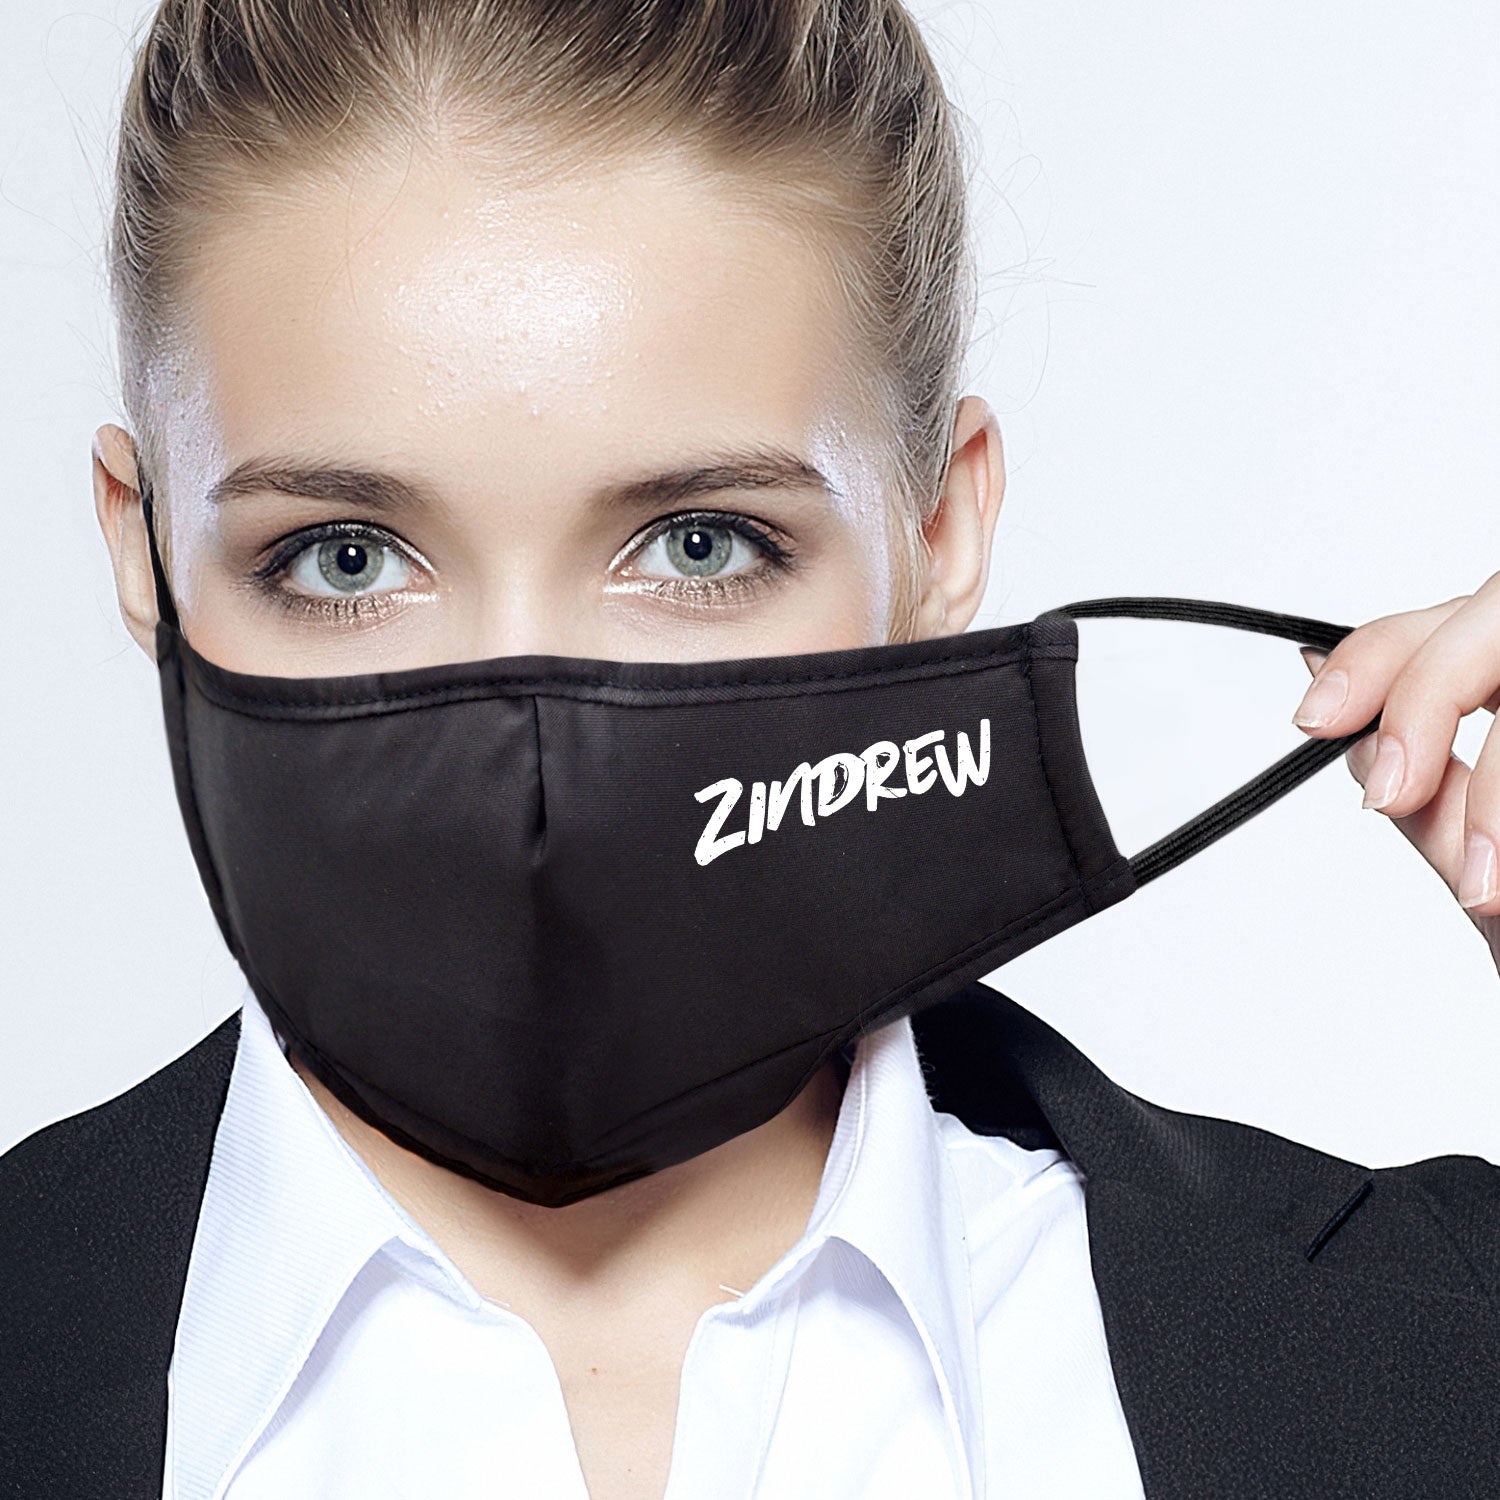 Zindrew Face Mask w/ Filter